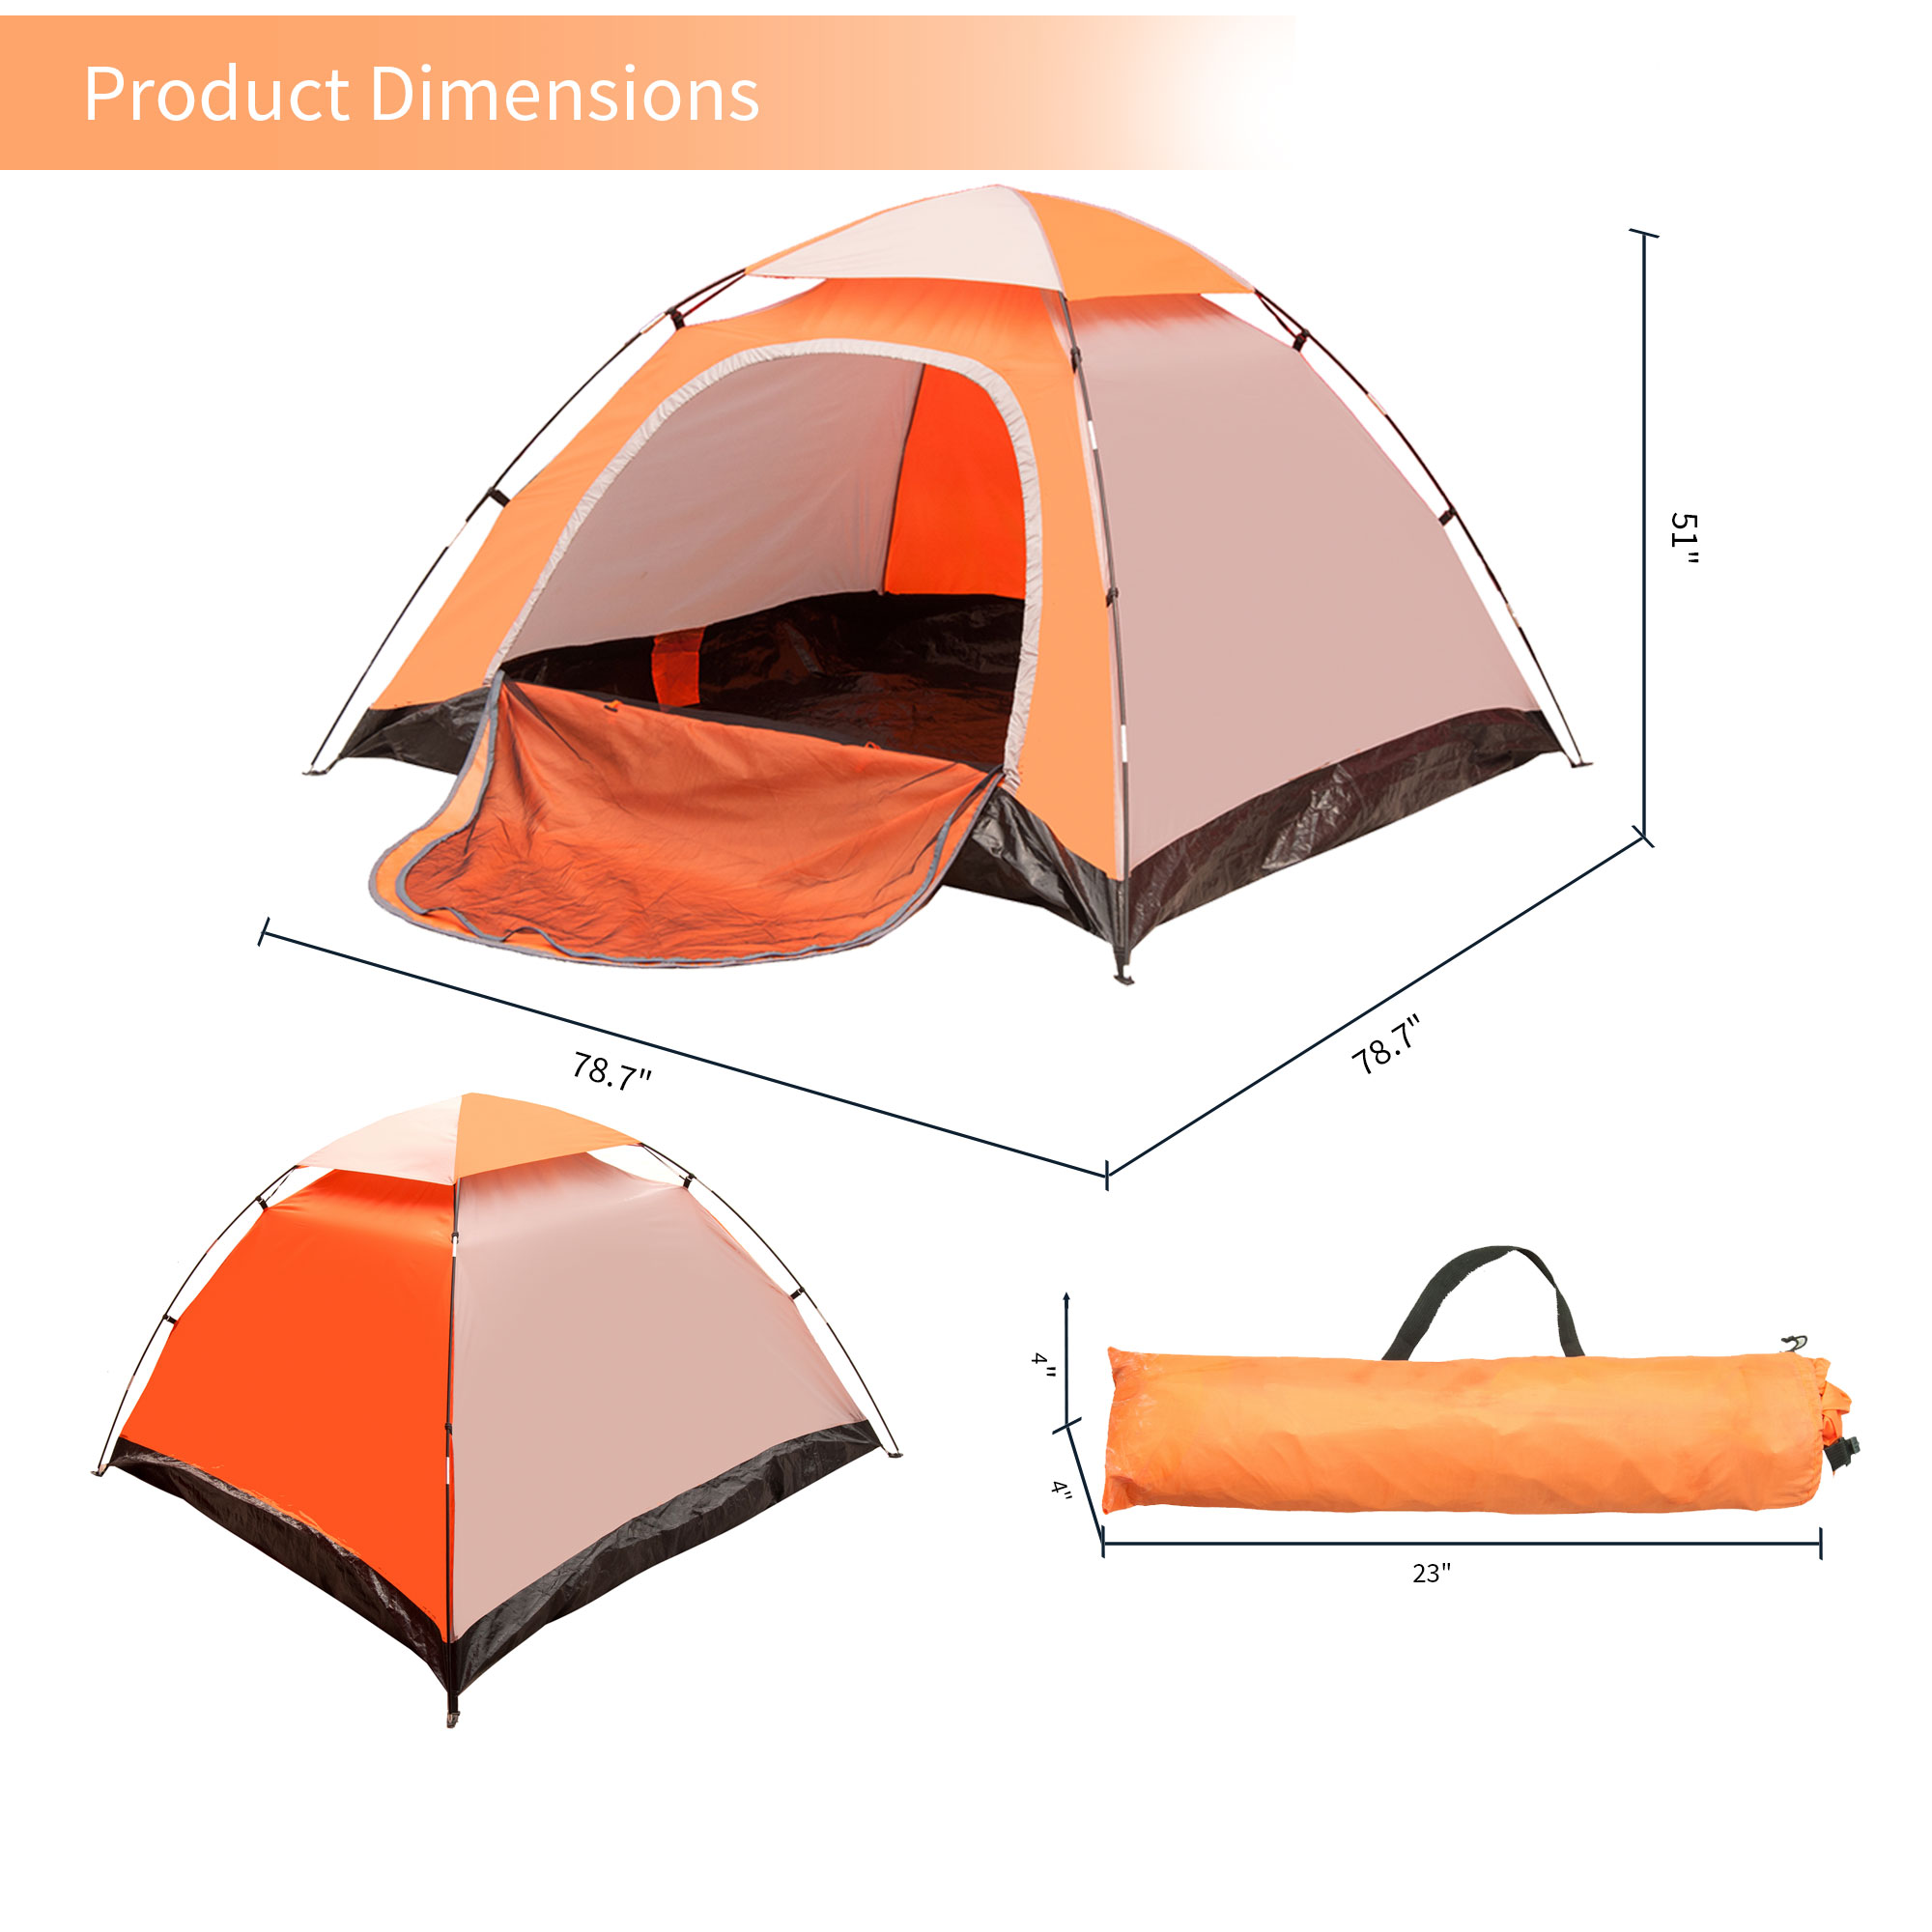 iCorer Waterproof Lightweight 2-3 Person Family Backpacking Camping Tent, 78.7" x 78.7" x 51" - image 2 of 8